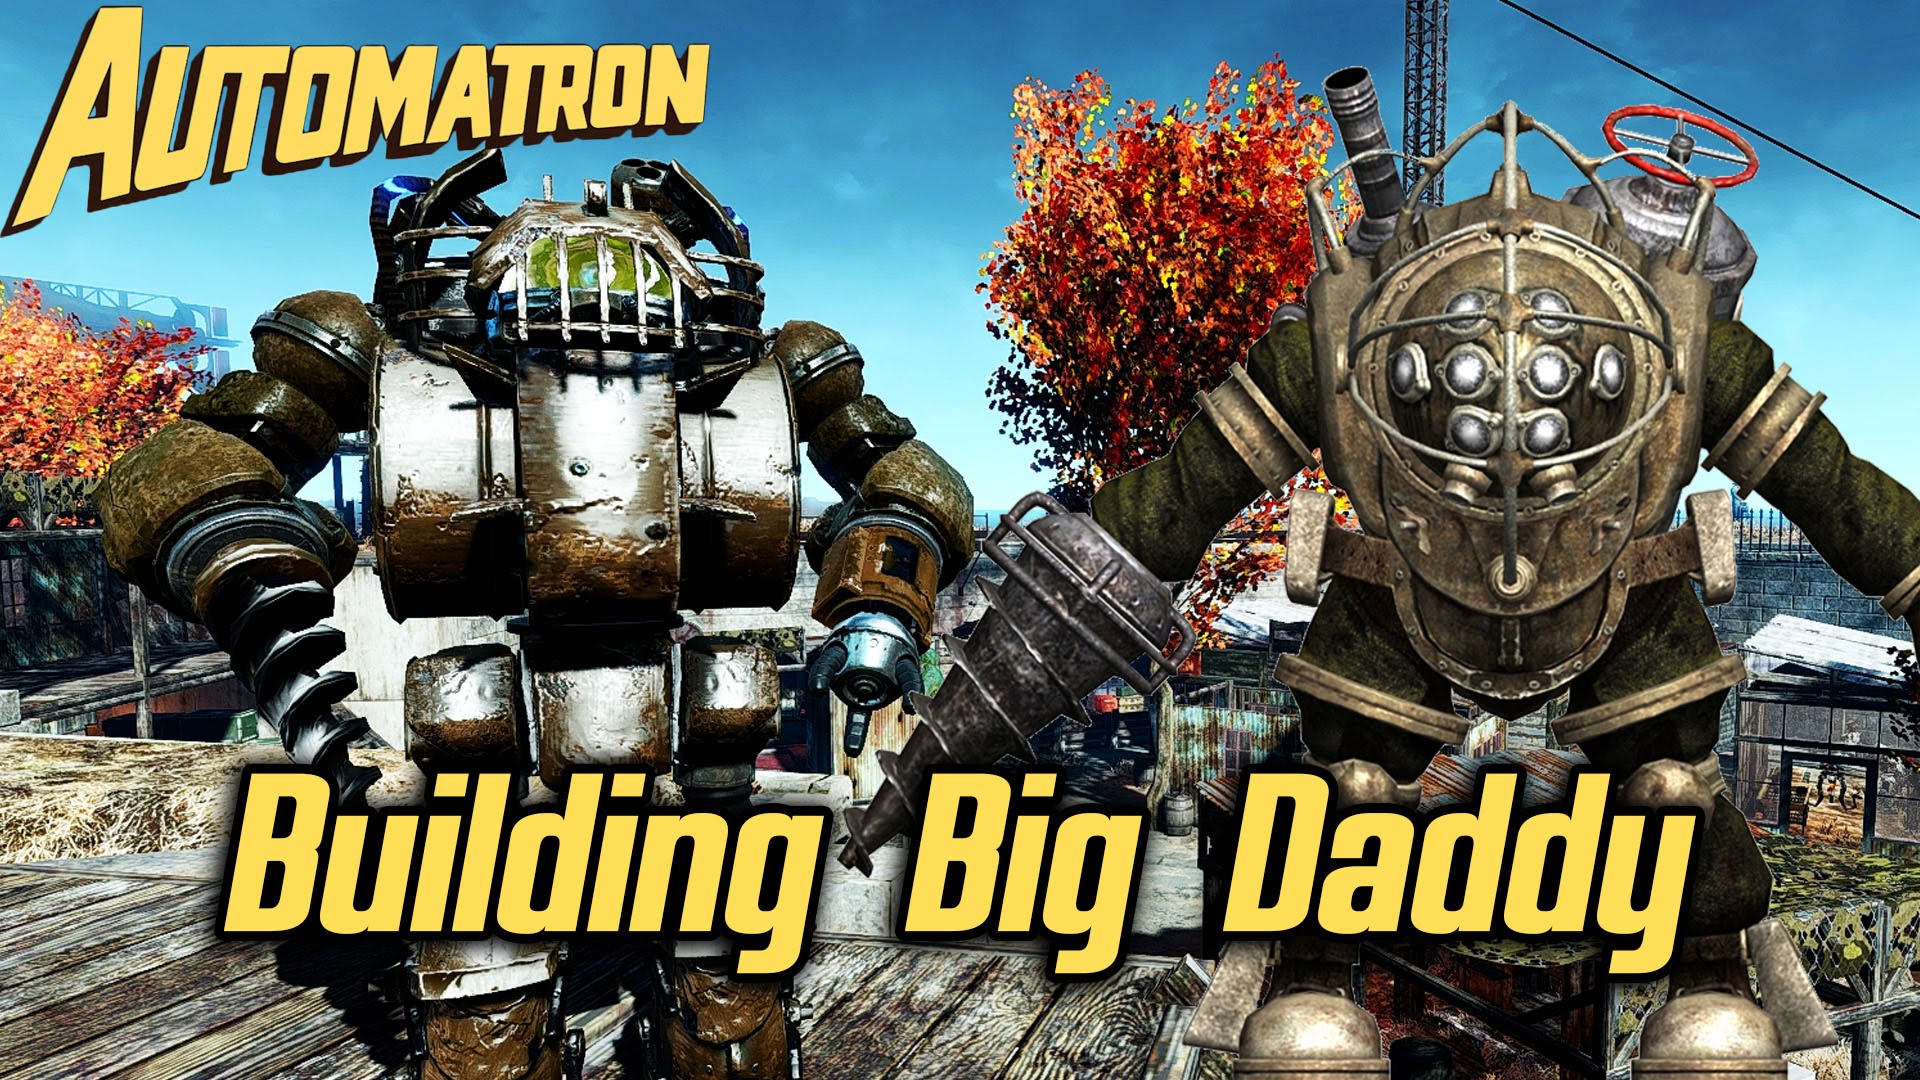 Nice wallpapers Big Daddy 1920x1080px